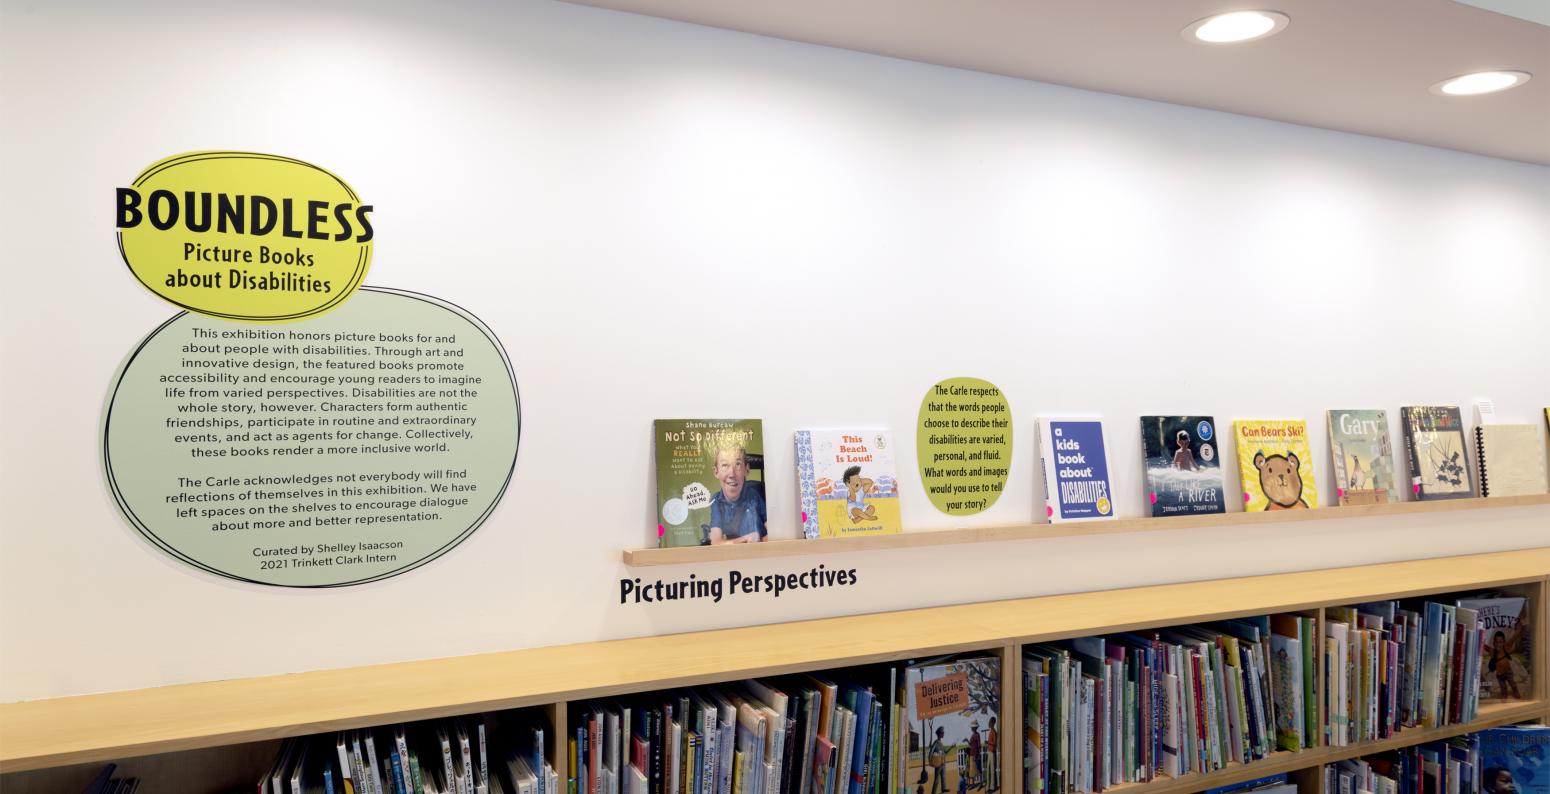 Installation image showing walls books and labels.